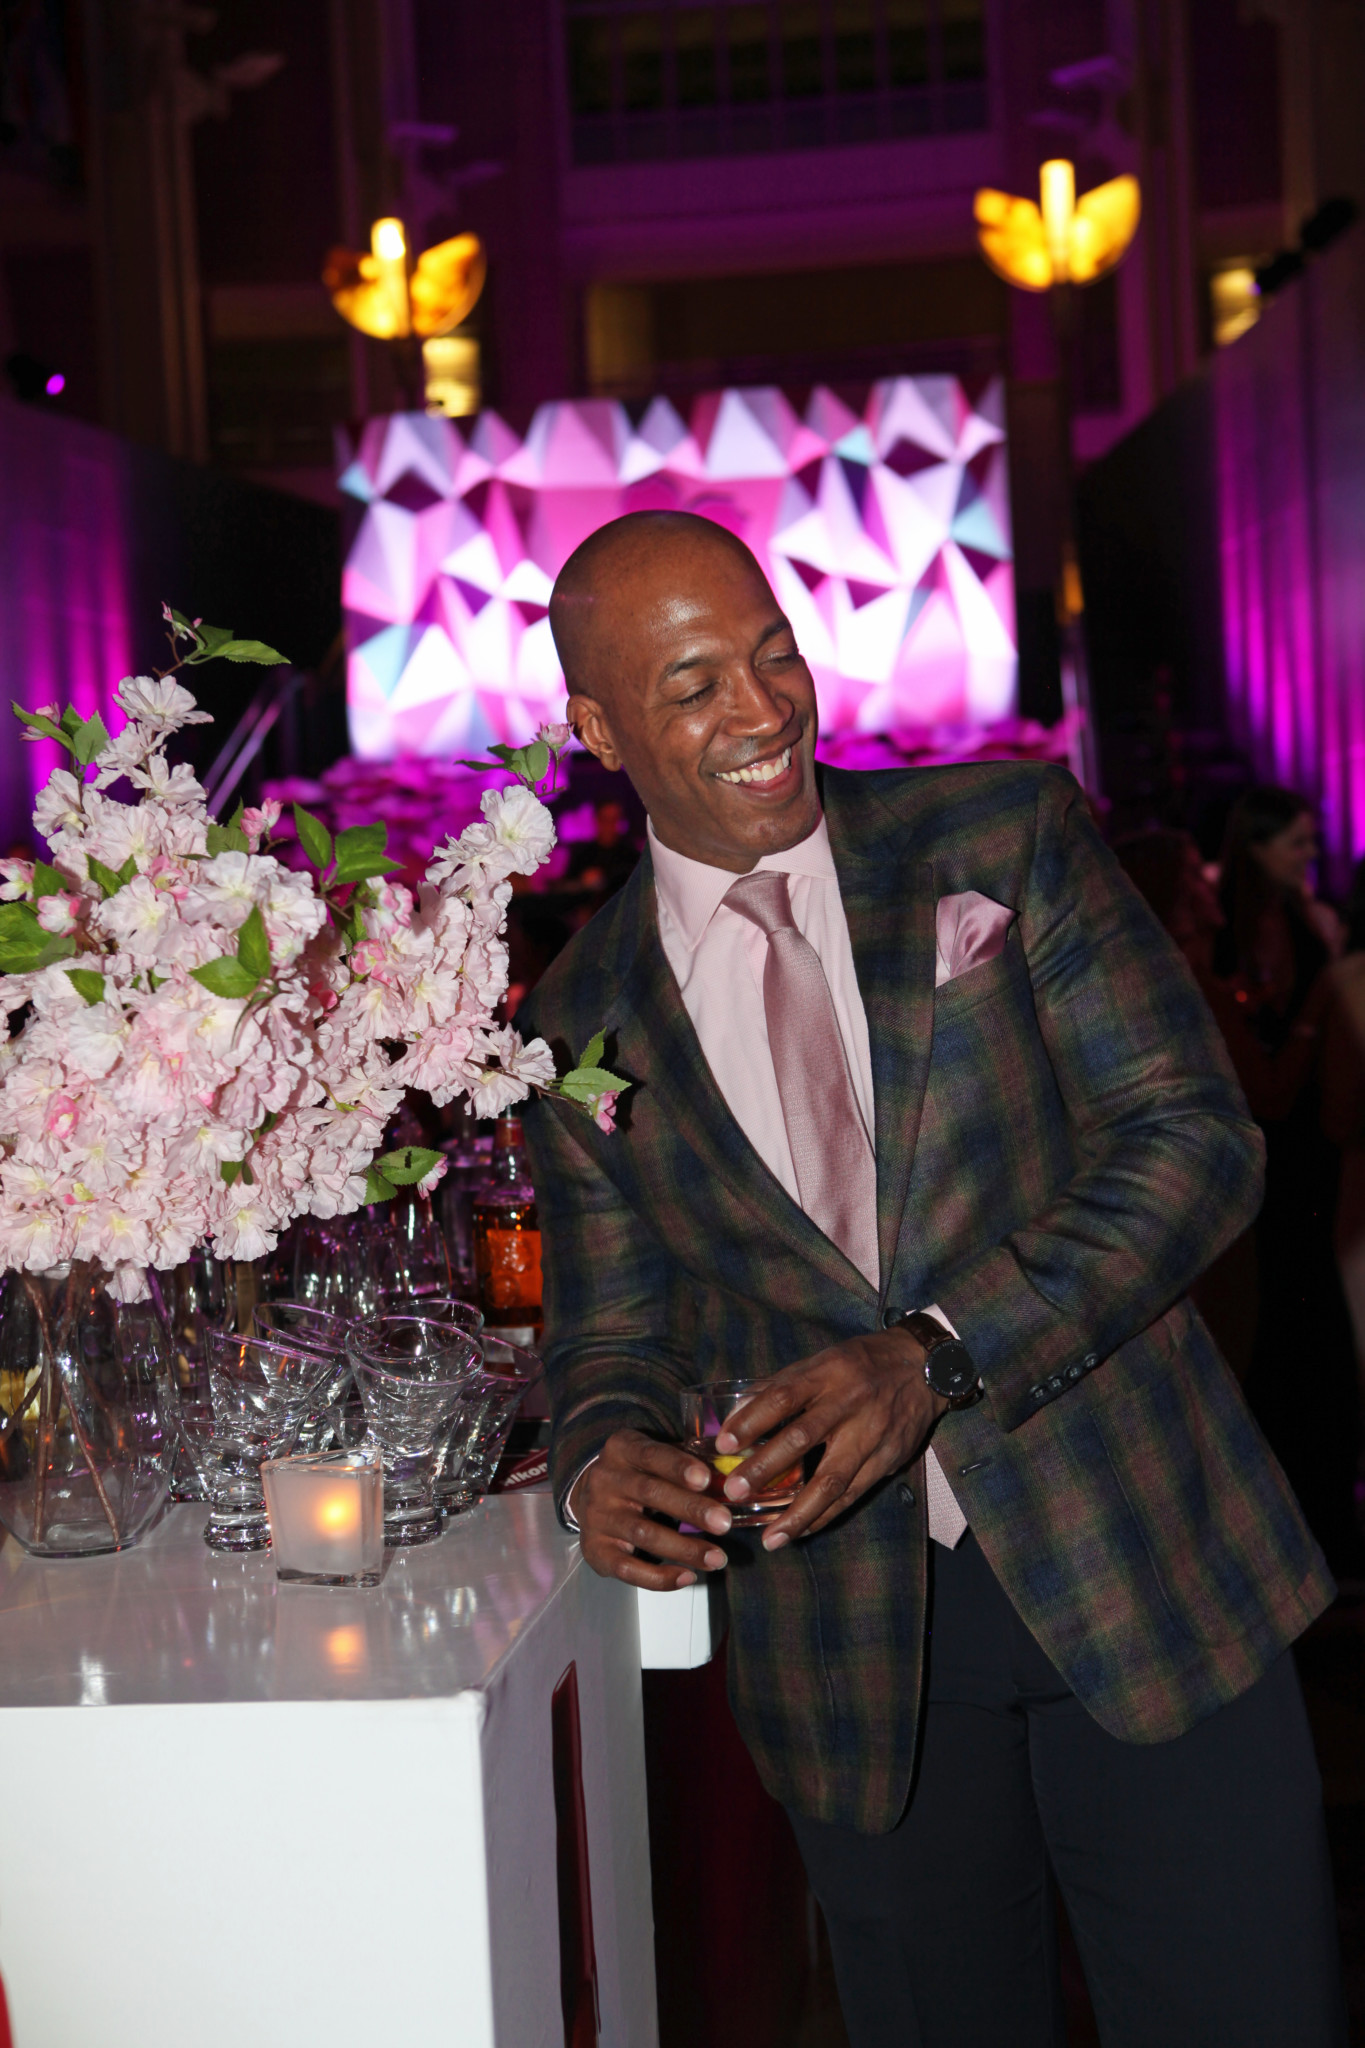 DCFashion Fool smiles at Cherry Blossom Pnk Tie Party